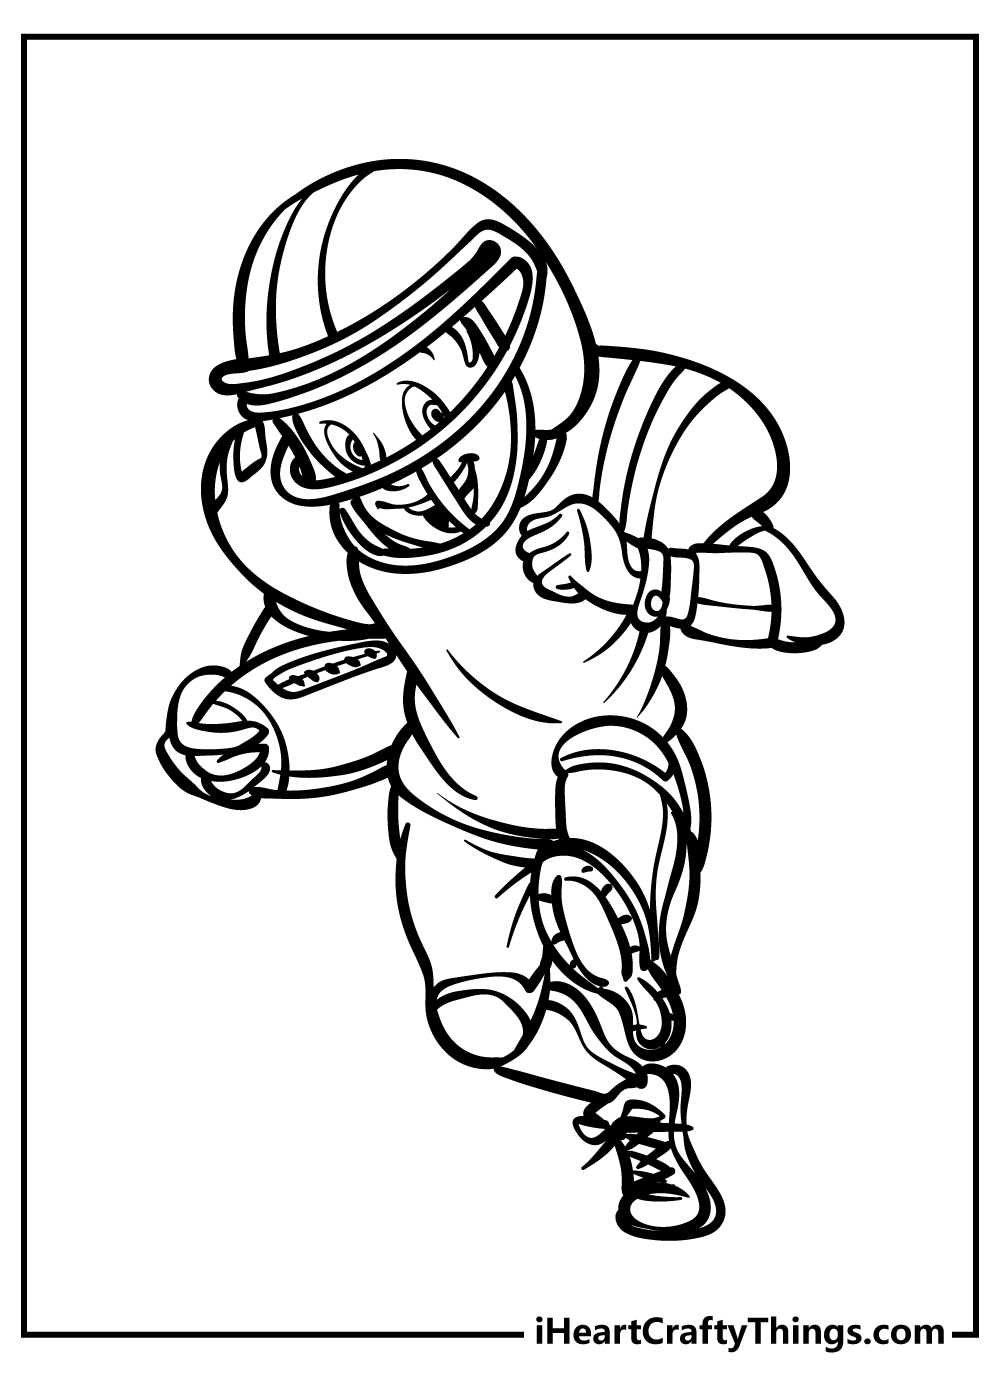 Football Coloring Pages free pdf download